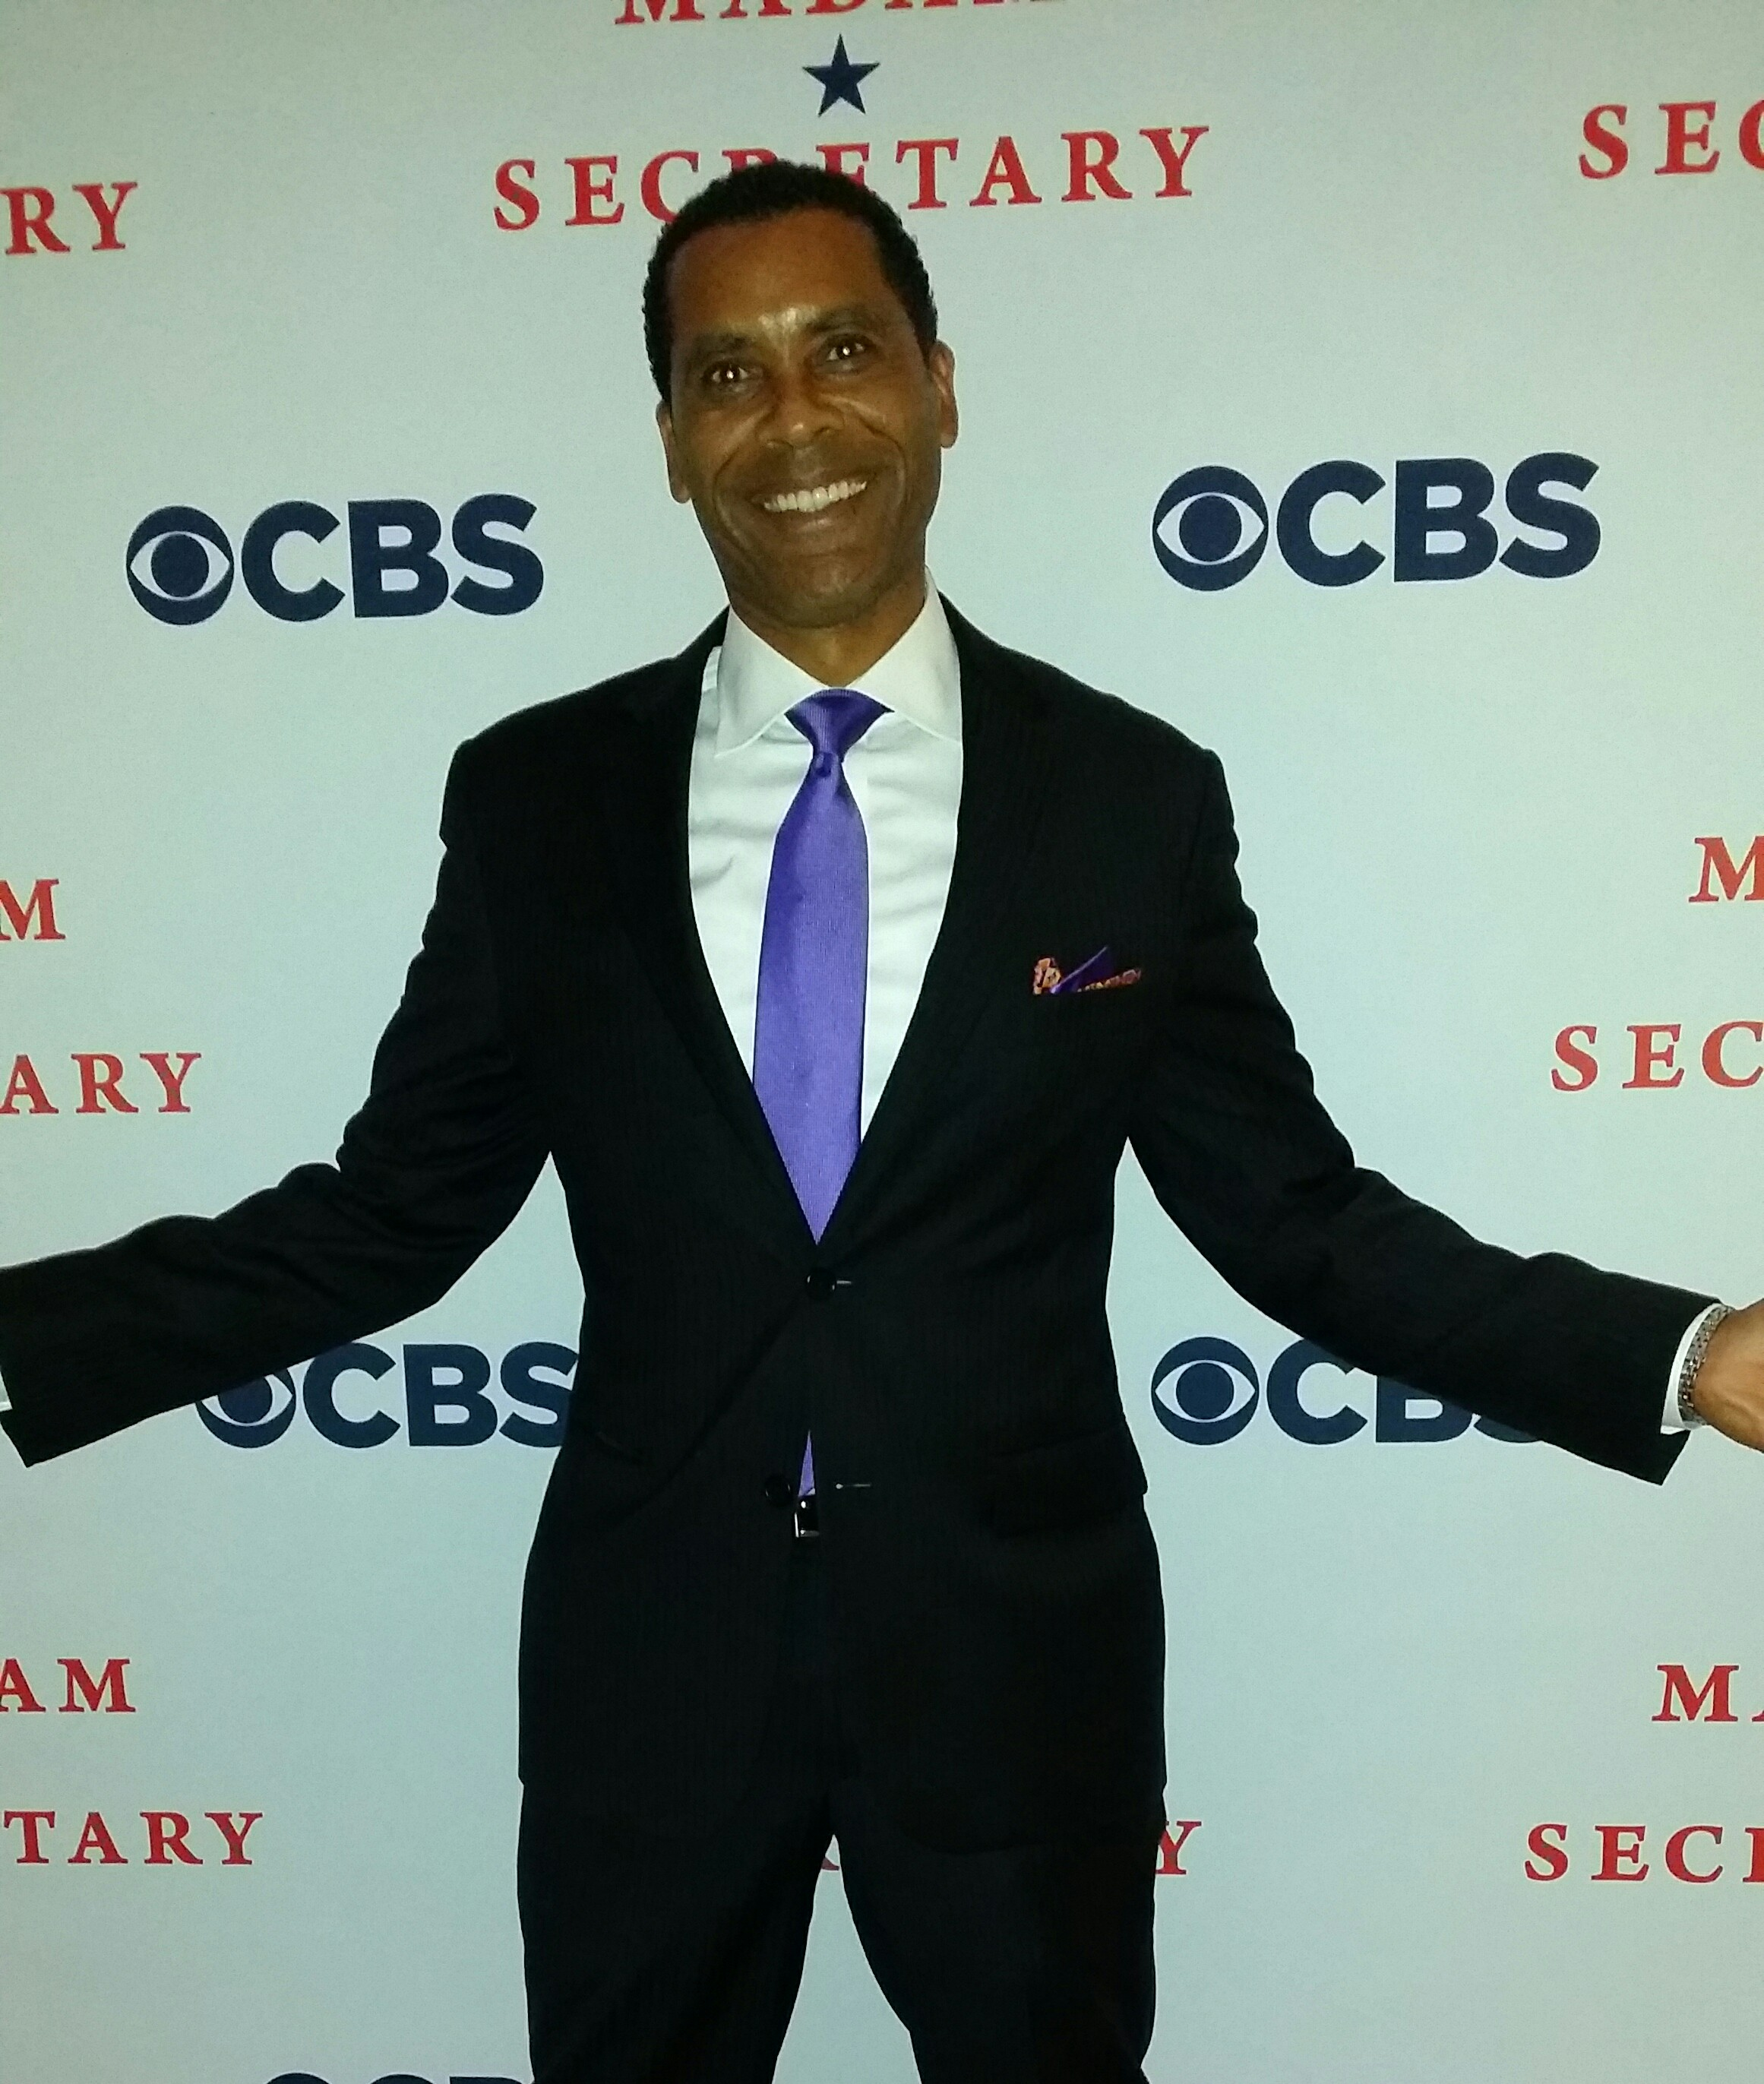 Actor Lamont Easter on the Red Carpet at the CBS Washington DC Premiere of Madam Secretary